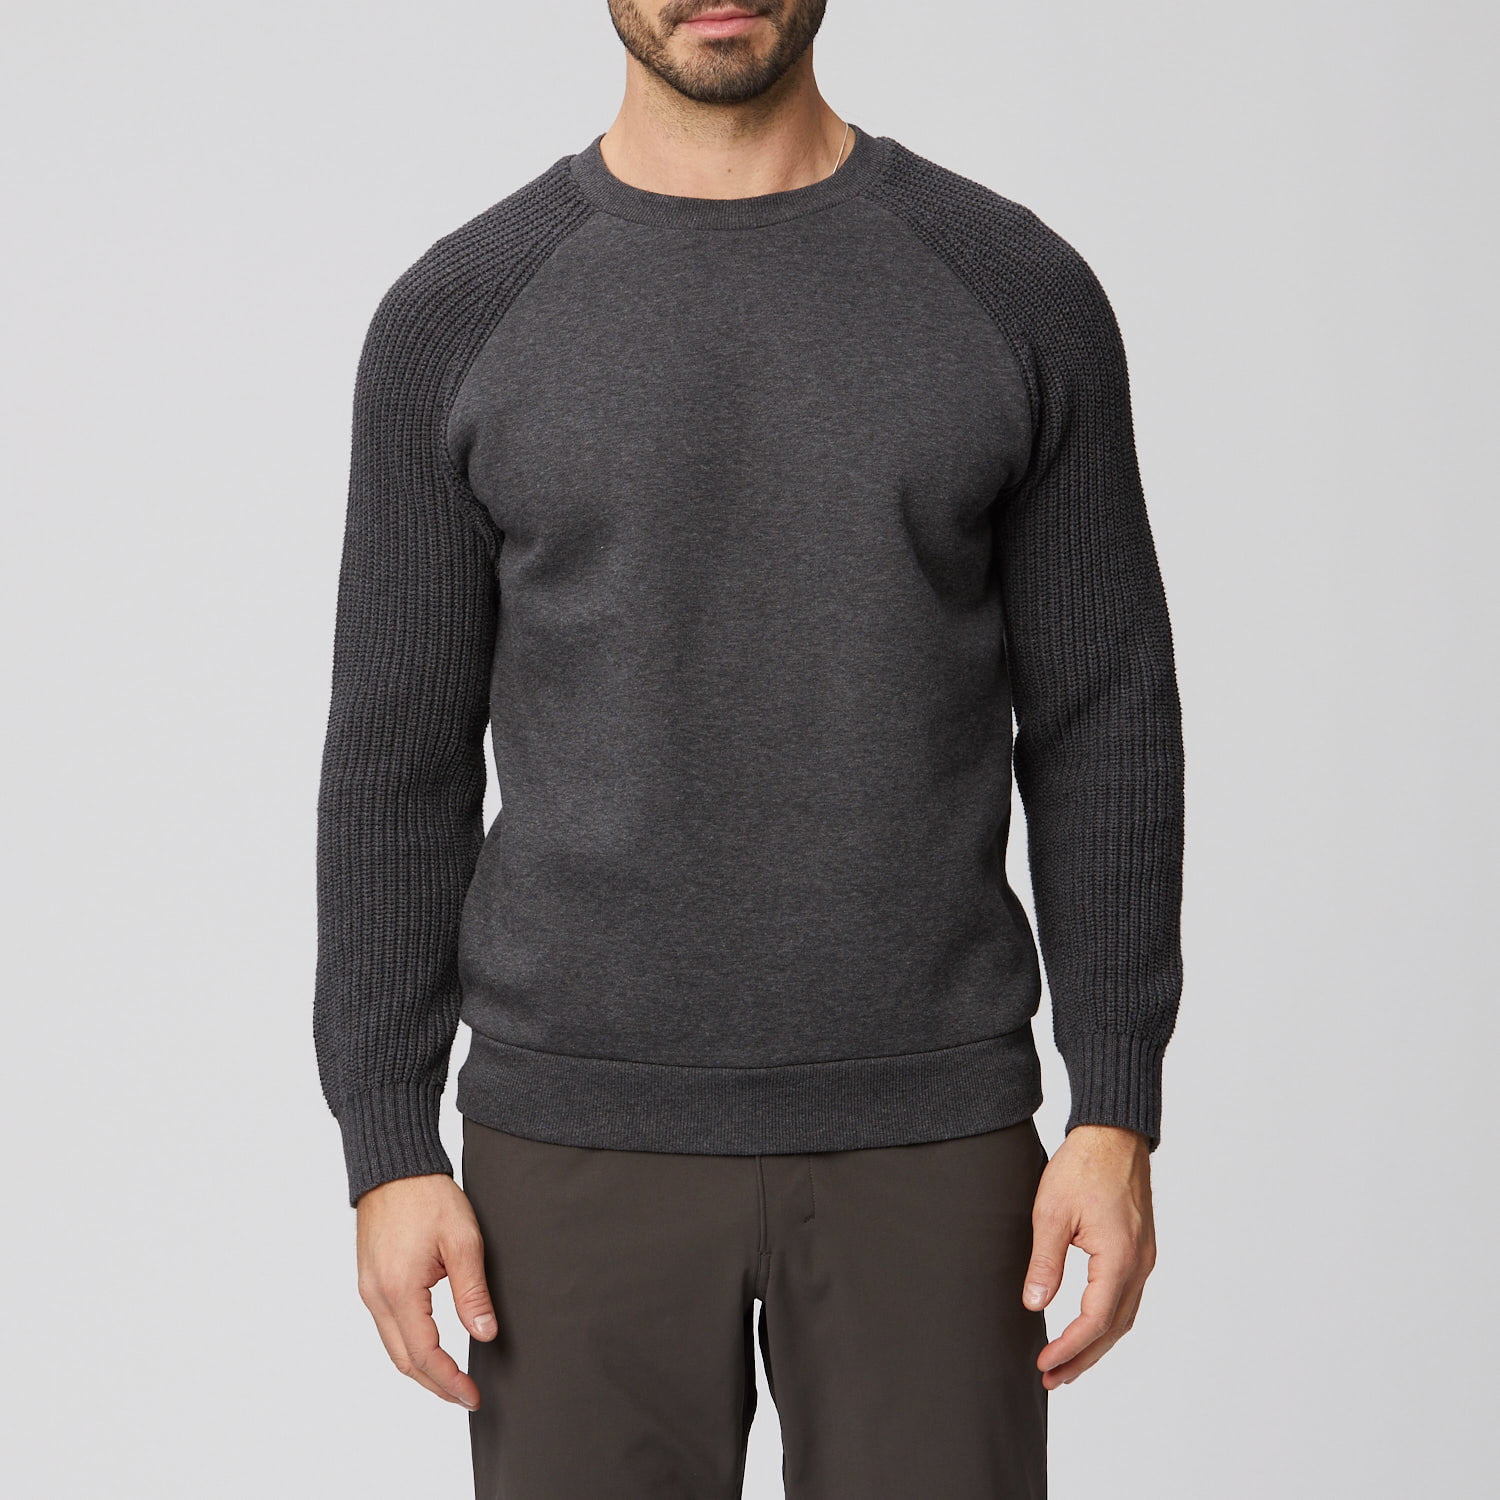 Rainforest - Men's Suede Fleece with Ribbed Knit Sleeve Crew Neck ...